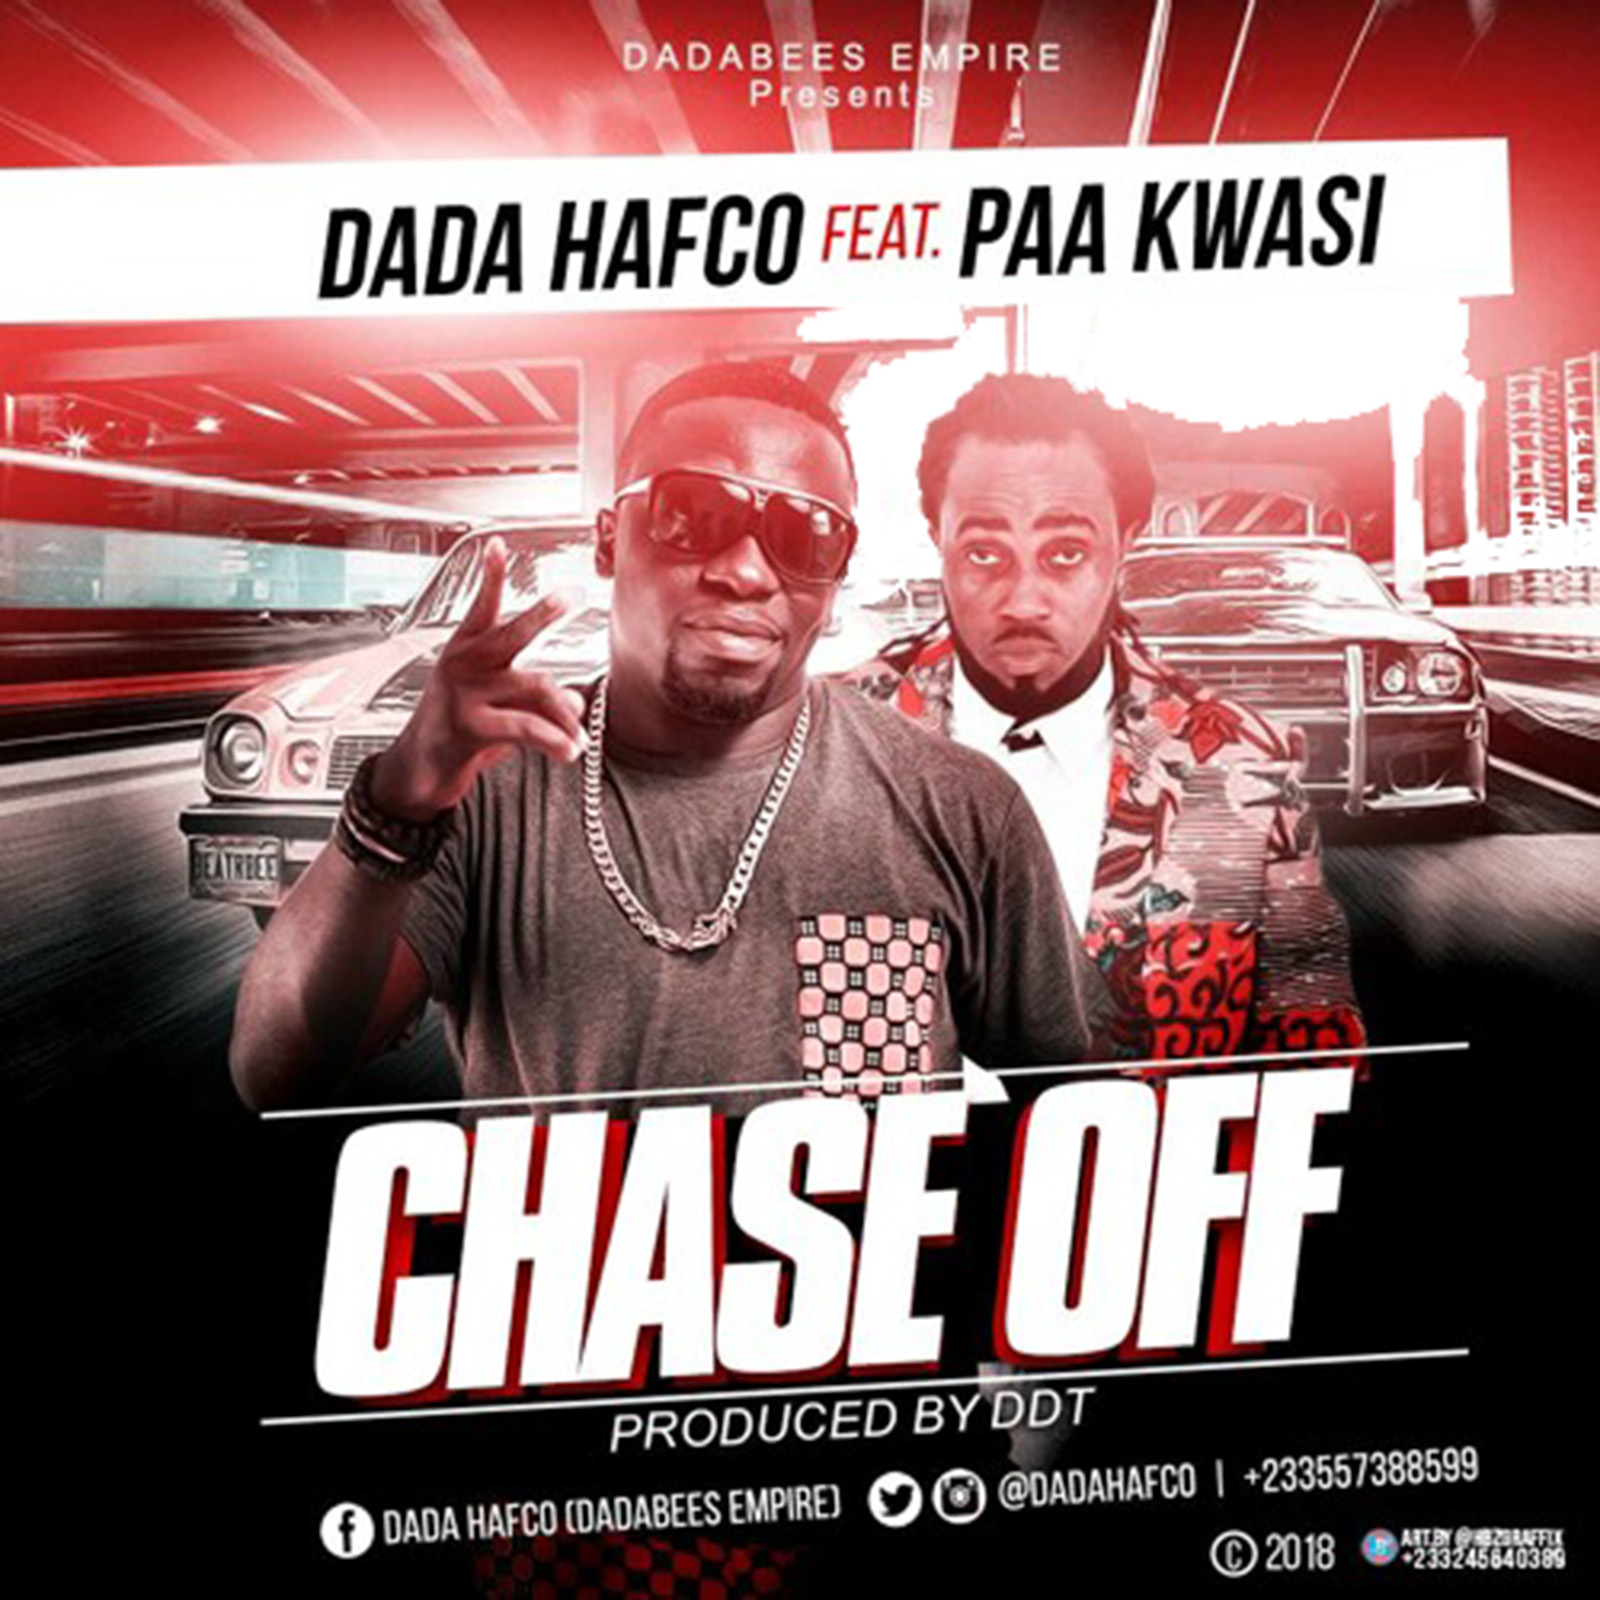 Chase Off by Dada Hafco feat. Paa Kwasi